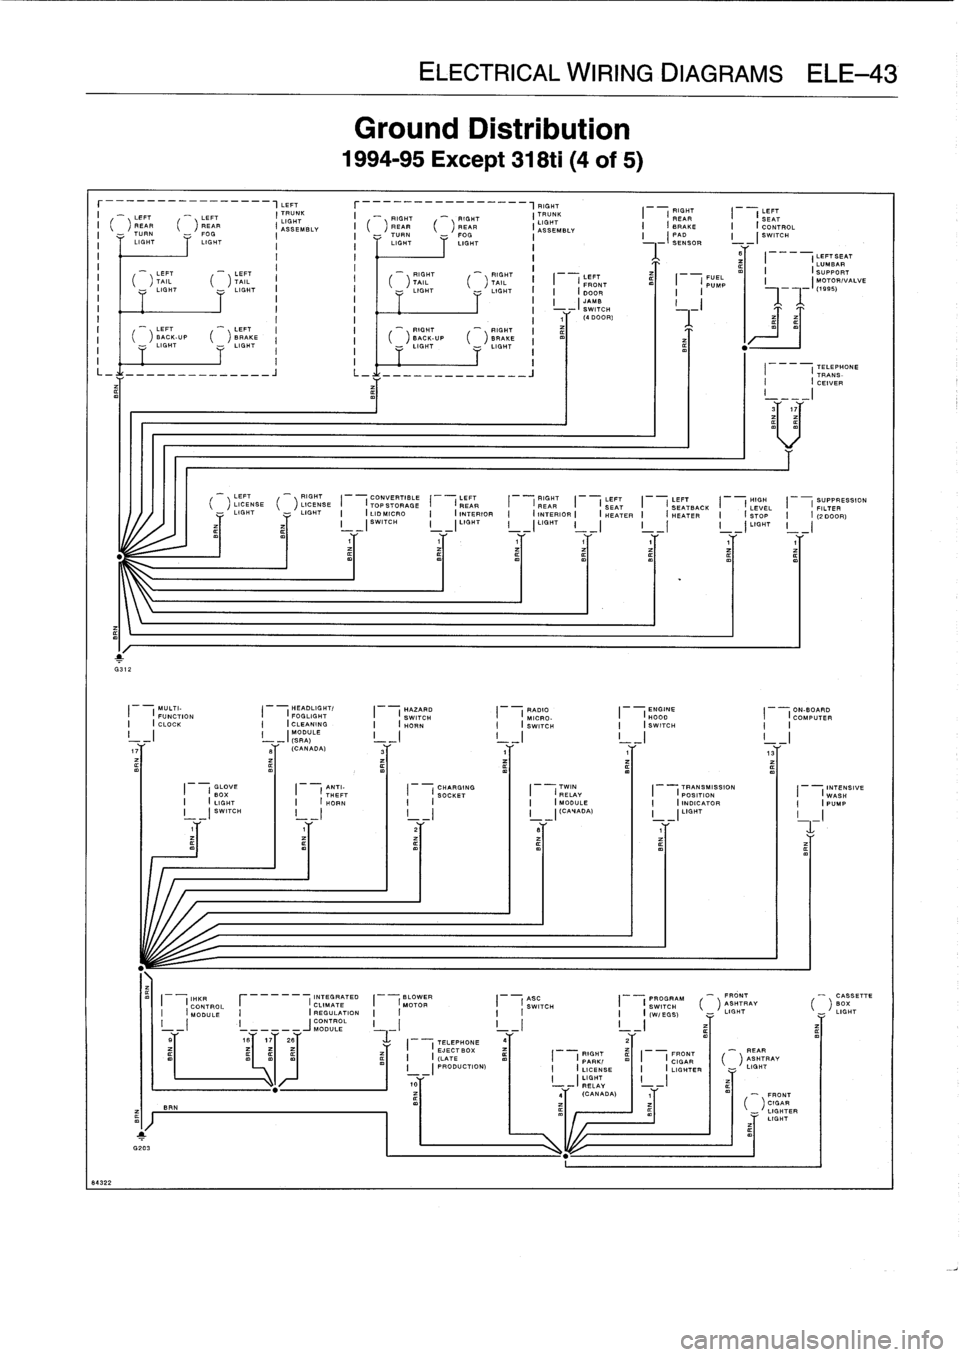 BMW 323i 1993 E36 Owners Guide 
ELECTRICAL
WIRING
DIAGRAMSELE-43

r----------_-__--,LEFT

	

r---__-------~_--,FIGHT
I

	

-

	

RIGHT

	

LIT
LEFT

	

"-

	

LEFT

	

I
IGHT
K

	

I

	

_

	

RIGHT

	



	

RIGHT

	

I
TRUNK
SEM